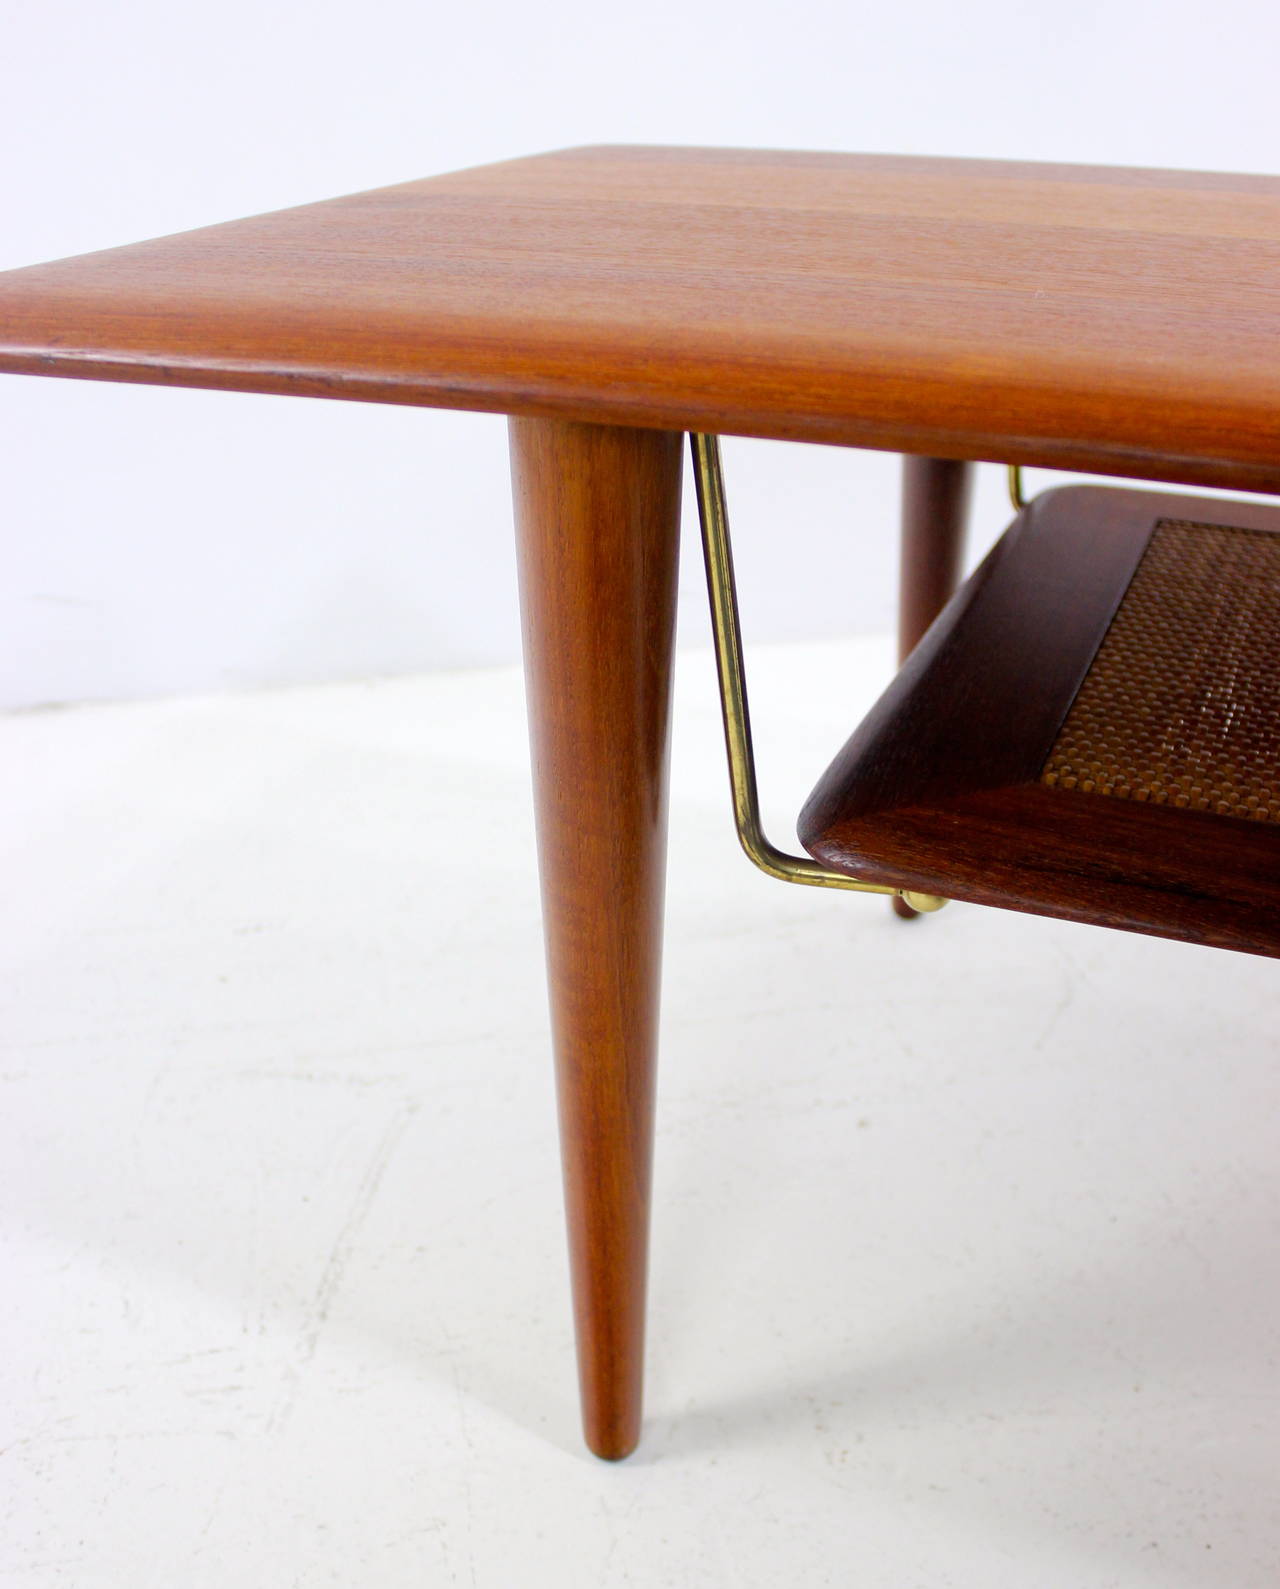 Danish Modern Teak Coffee Table Designed by Peter Hvidt In Excellent Condition For Sale In Portland, OR